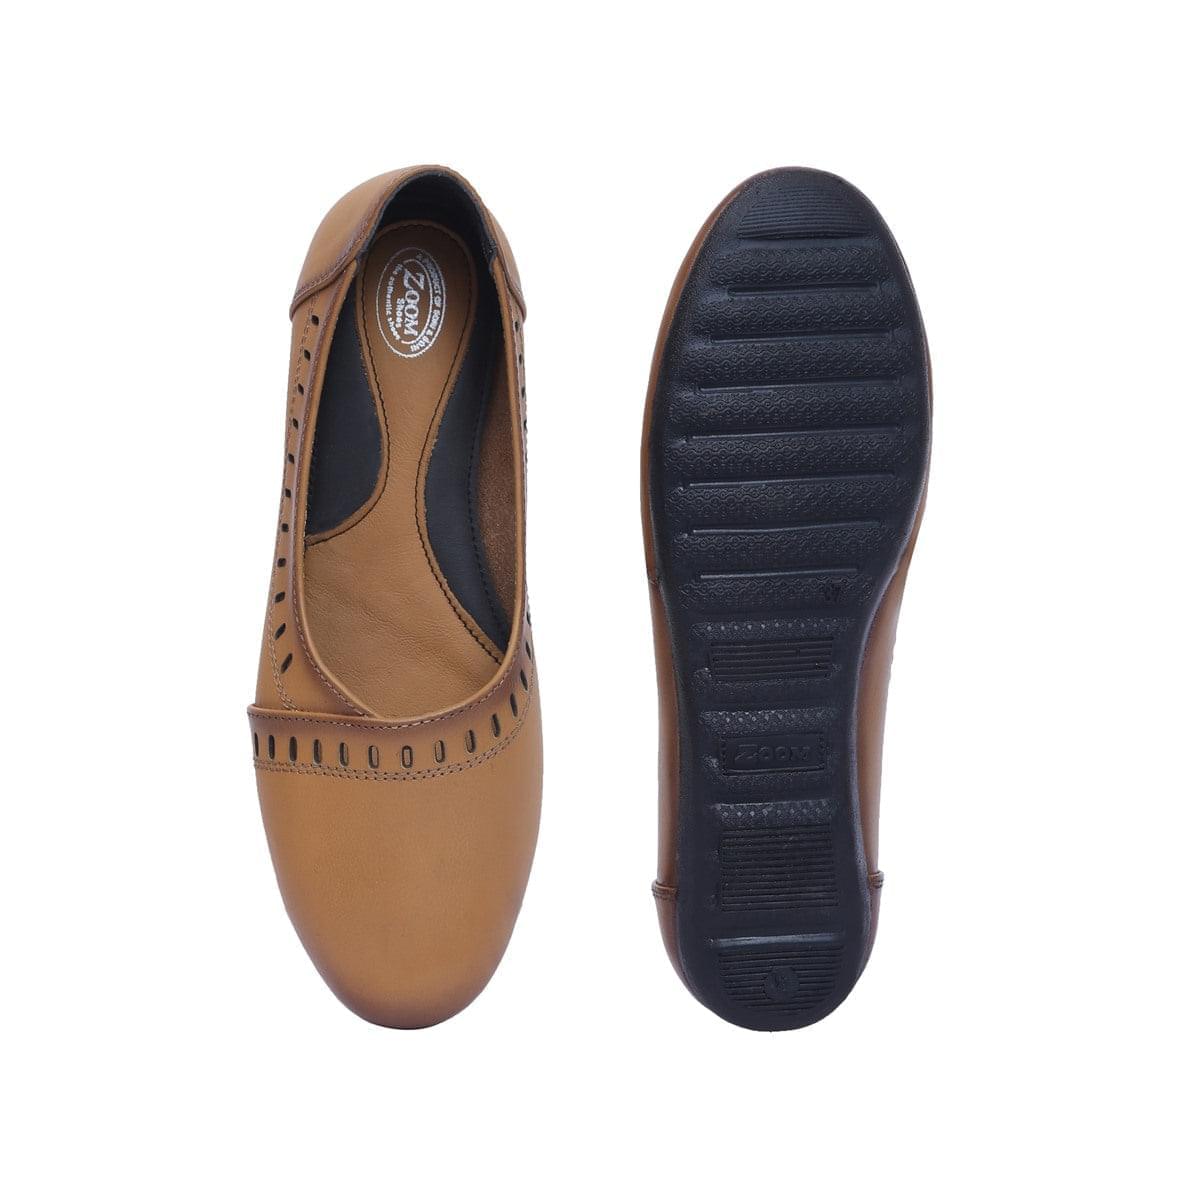 Genuine Leather Bellies for Women VN-25